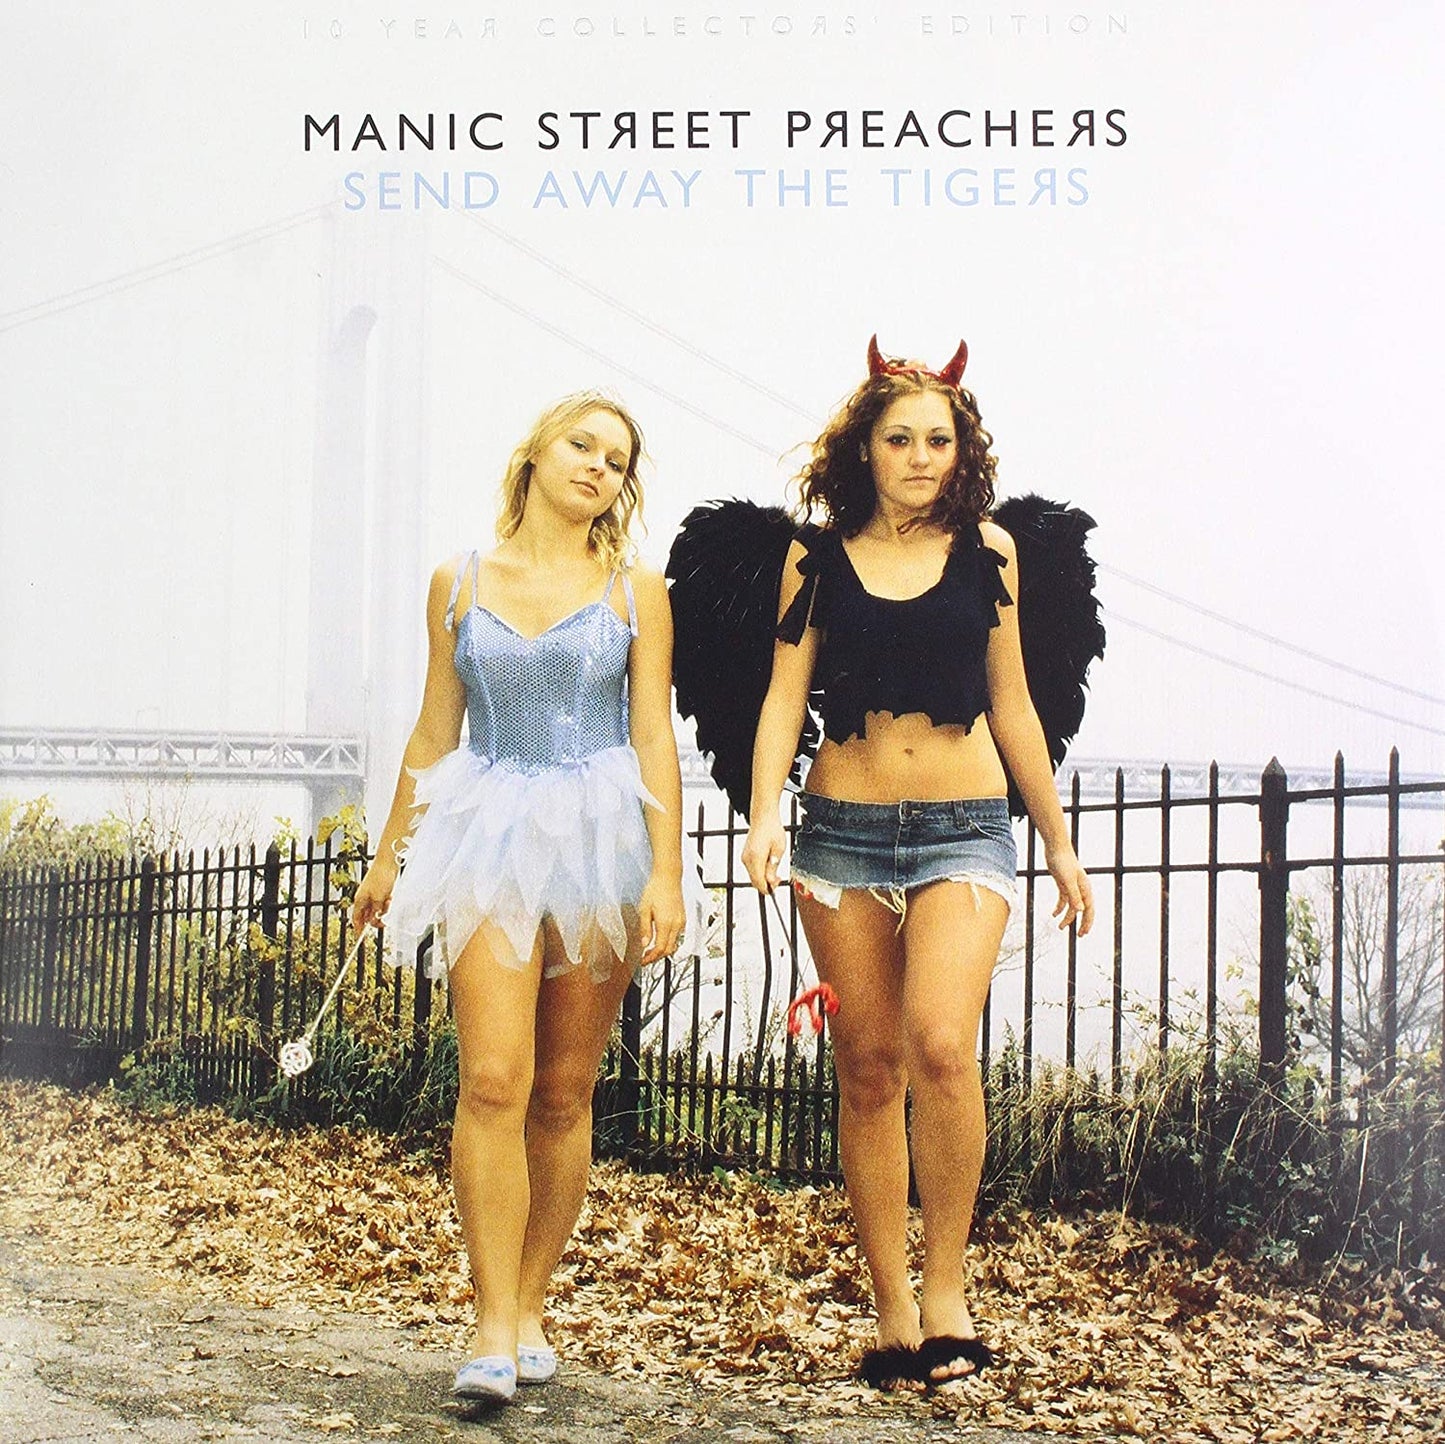 Manic Street Preachers' eighth studio album, Send Away The Tigers, enjoys its 10th anniversary this year and to celebrate they are releasing a special edition double gatefold vinyl. Includes the original album remastered by James Dean Bradfield and previously unheard demos plus download codes.